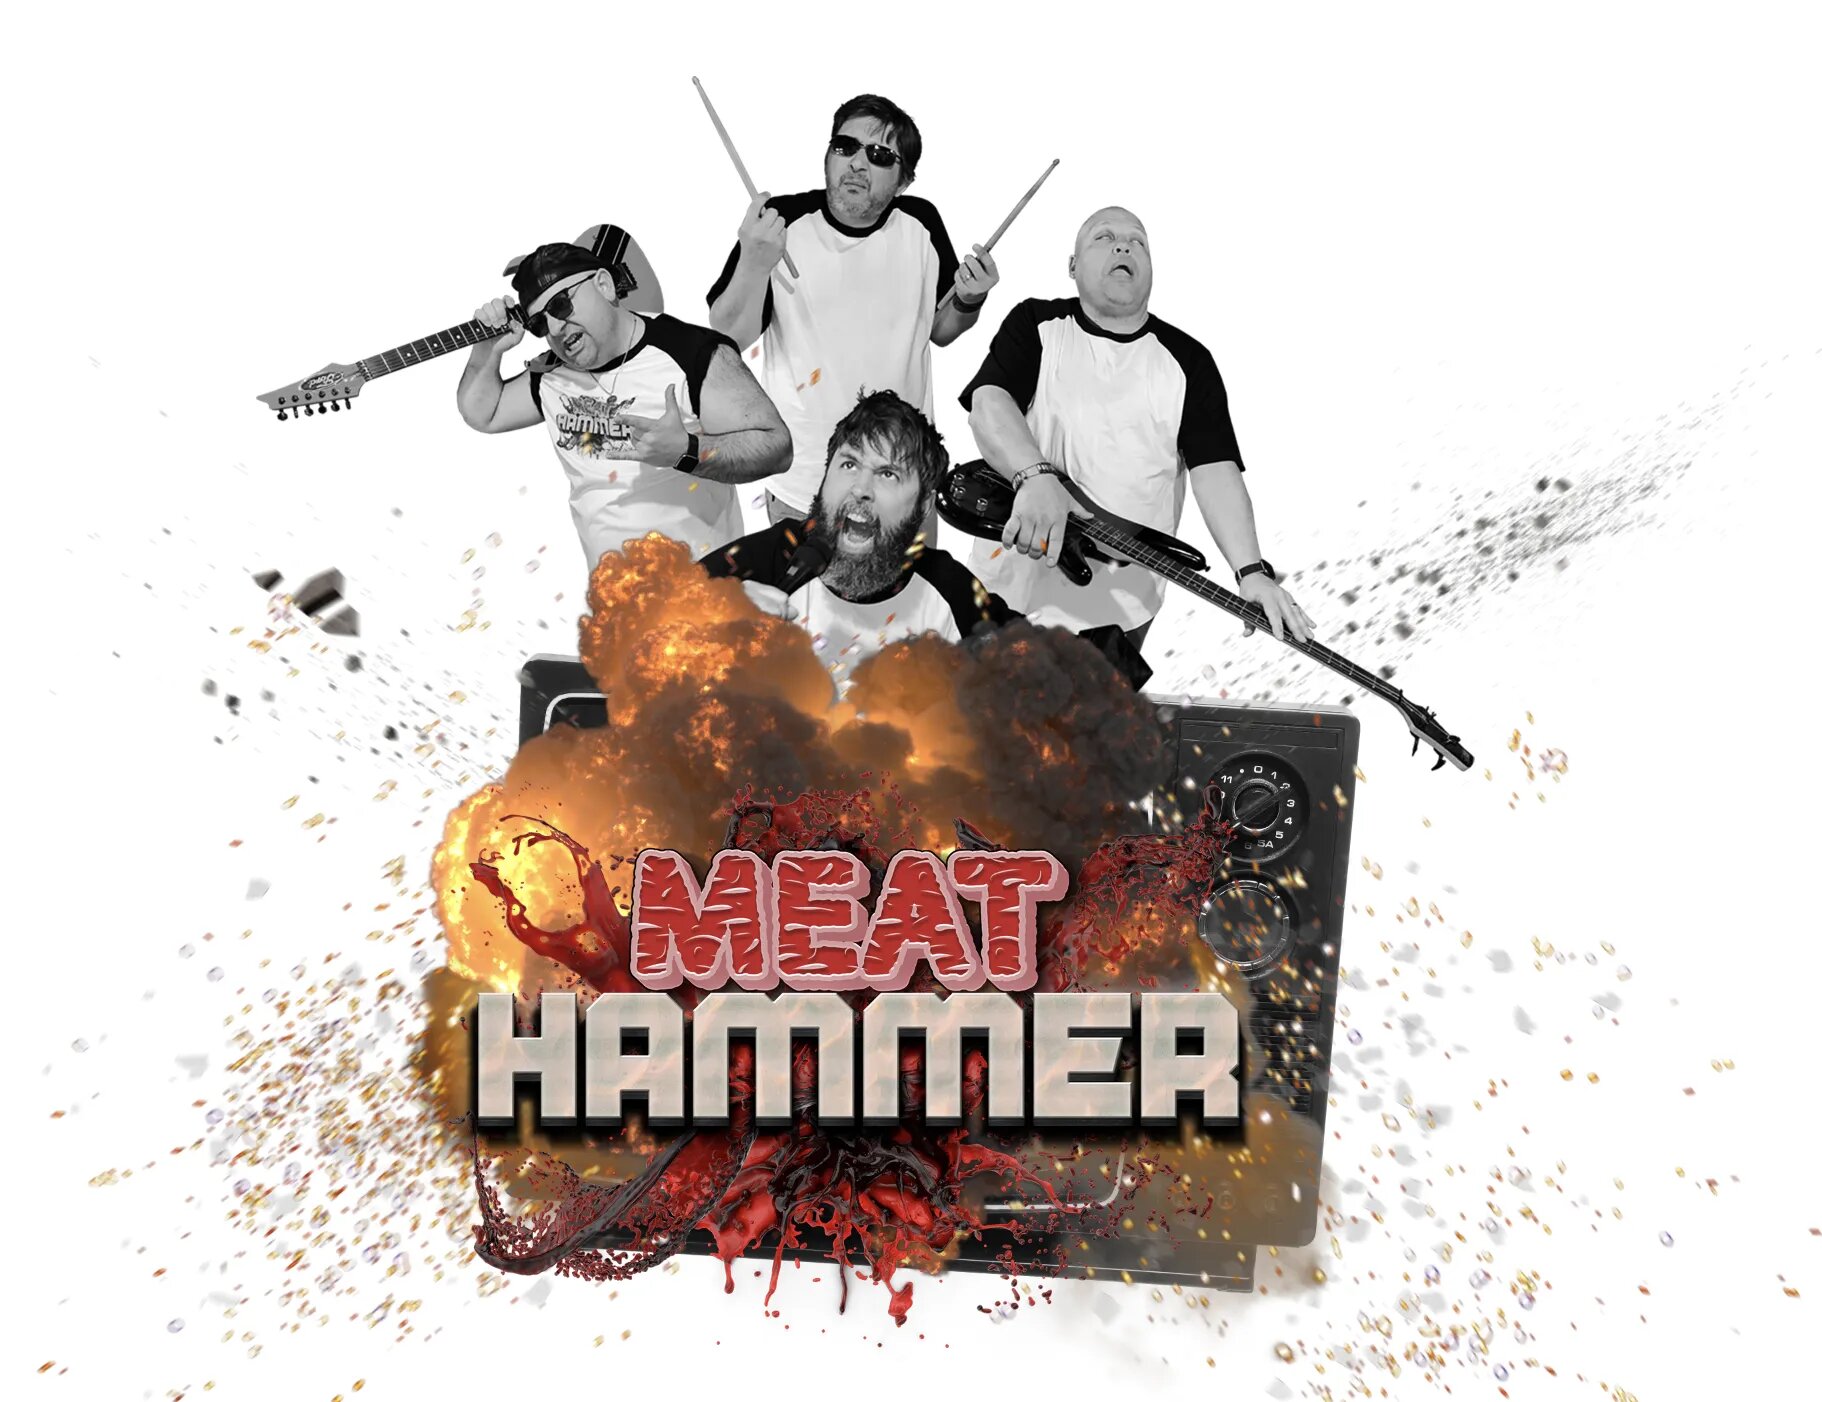 The official Image of MeatHammer. The fake Heavy Metal Rock Band made up of the Mental Suppository Crew. Image of t-shirted middle-aged white guys with guitars, drumsticks and sitting astride a platform with the letter Meat in Red and Hammer in White.